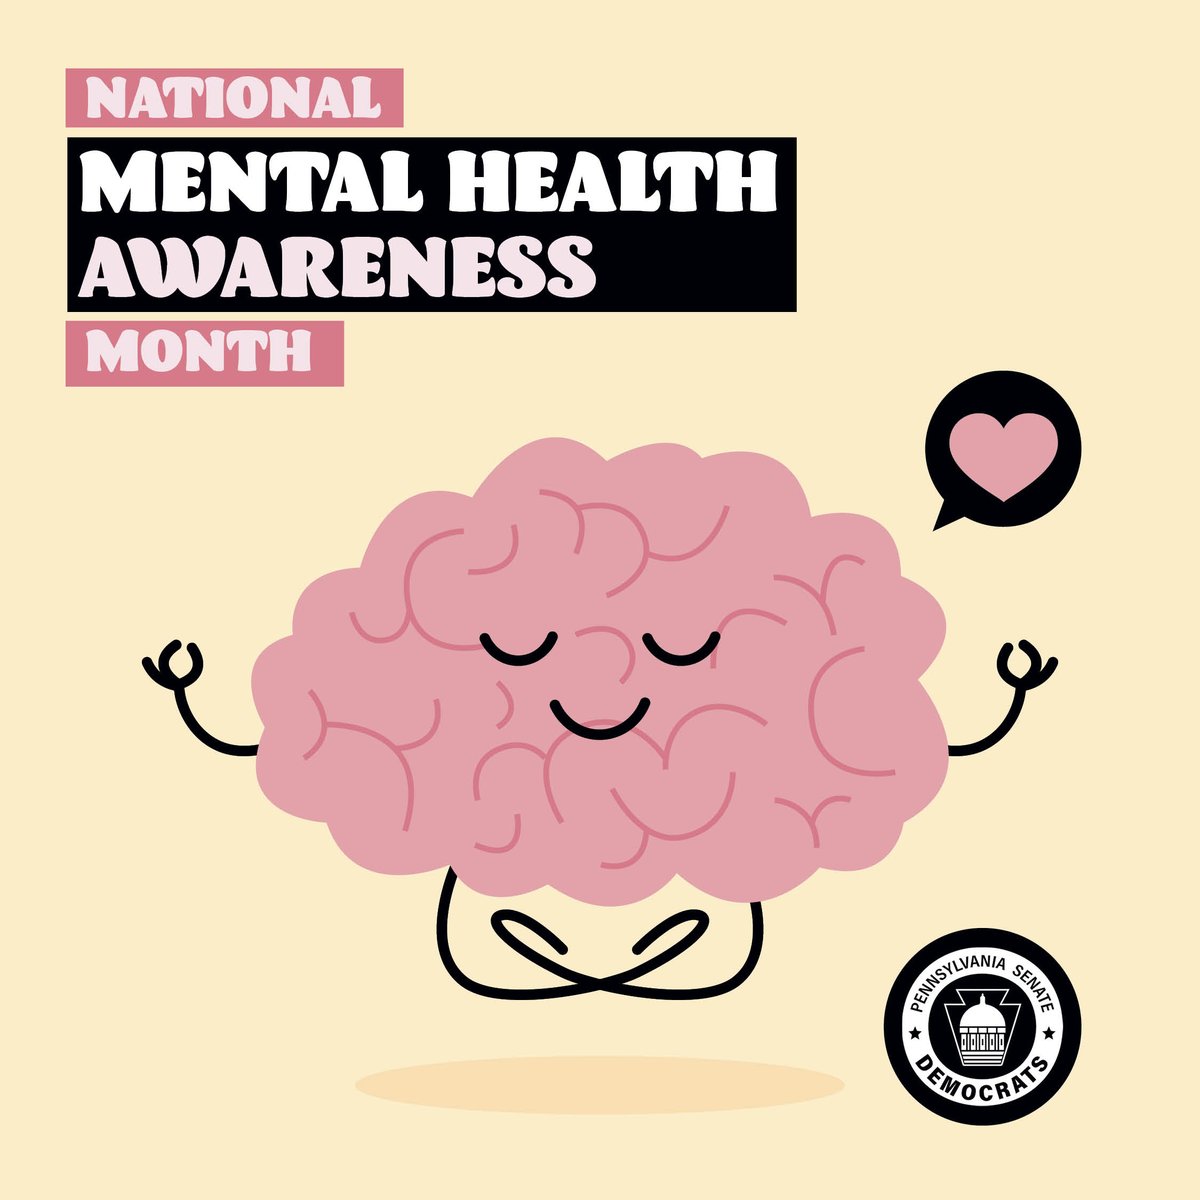 May is National Mental Health Awareness Month.

It is a great time to promote positive mental health through activities that allow time to recognize your personal feelings, moods and well-being.

#TakeAMentalHealthMoment #MentalHealthMonth